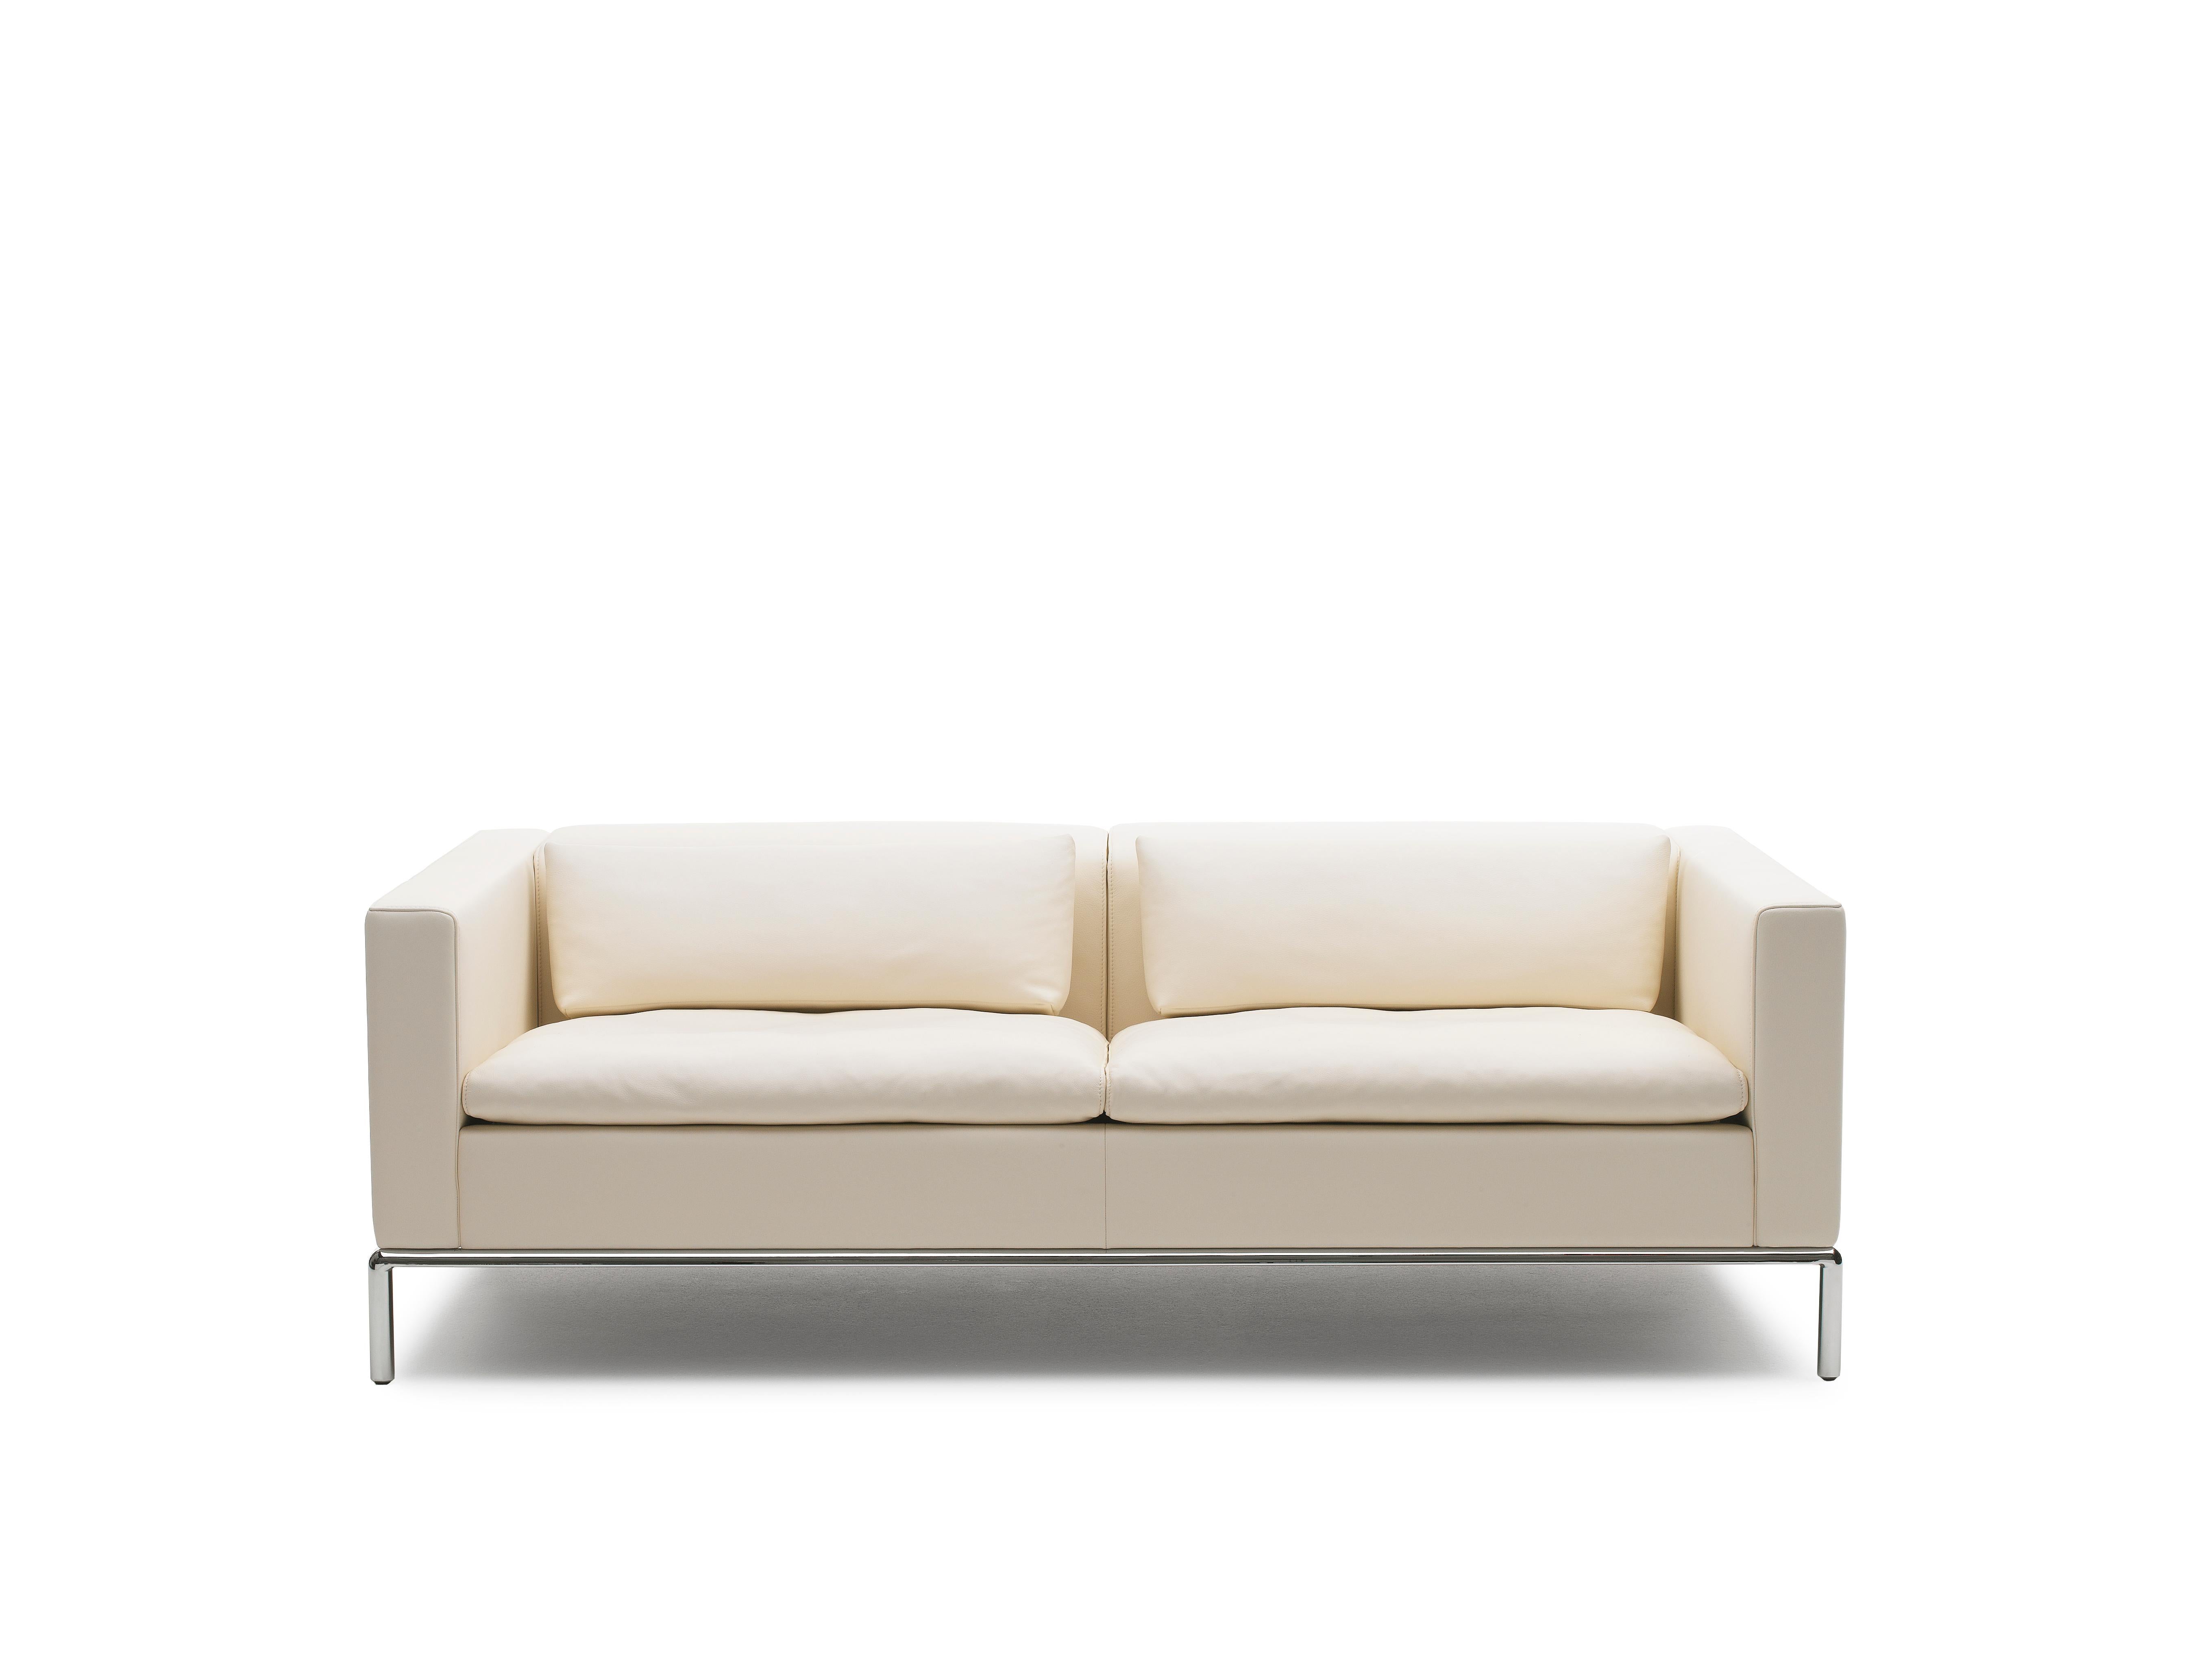 Set of DS-5 sofa and 2 cushions by De Sede
Designer: Antonella Scarpitta
Dimensions:
Sofa: D 98 x W 143 x H 60/84 cm
Cushion: 12 x 52 x 25 cm
Materials: frame in solid beech, belted suspension; 
seat and back cushions: SEDEX upholstery, with